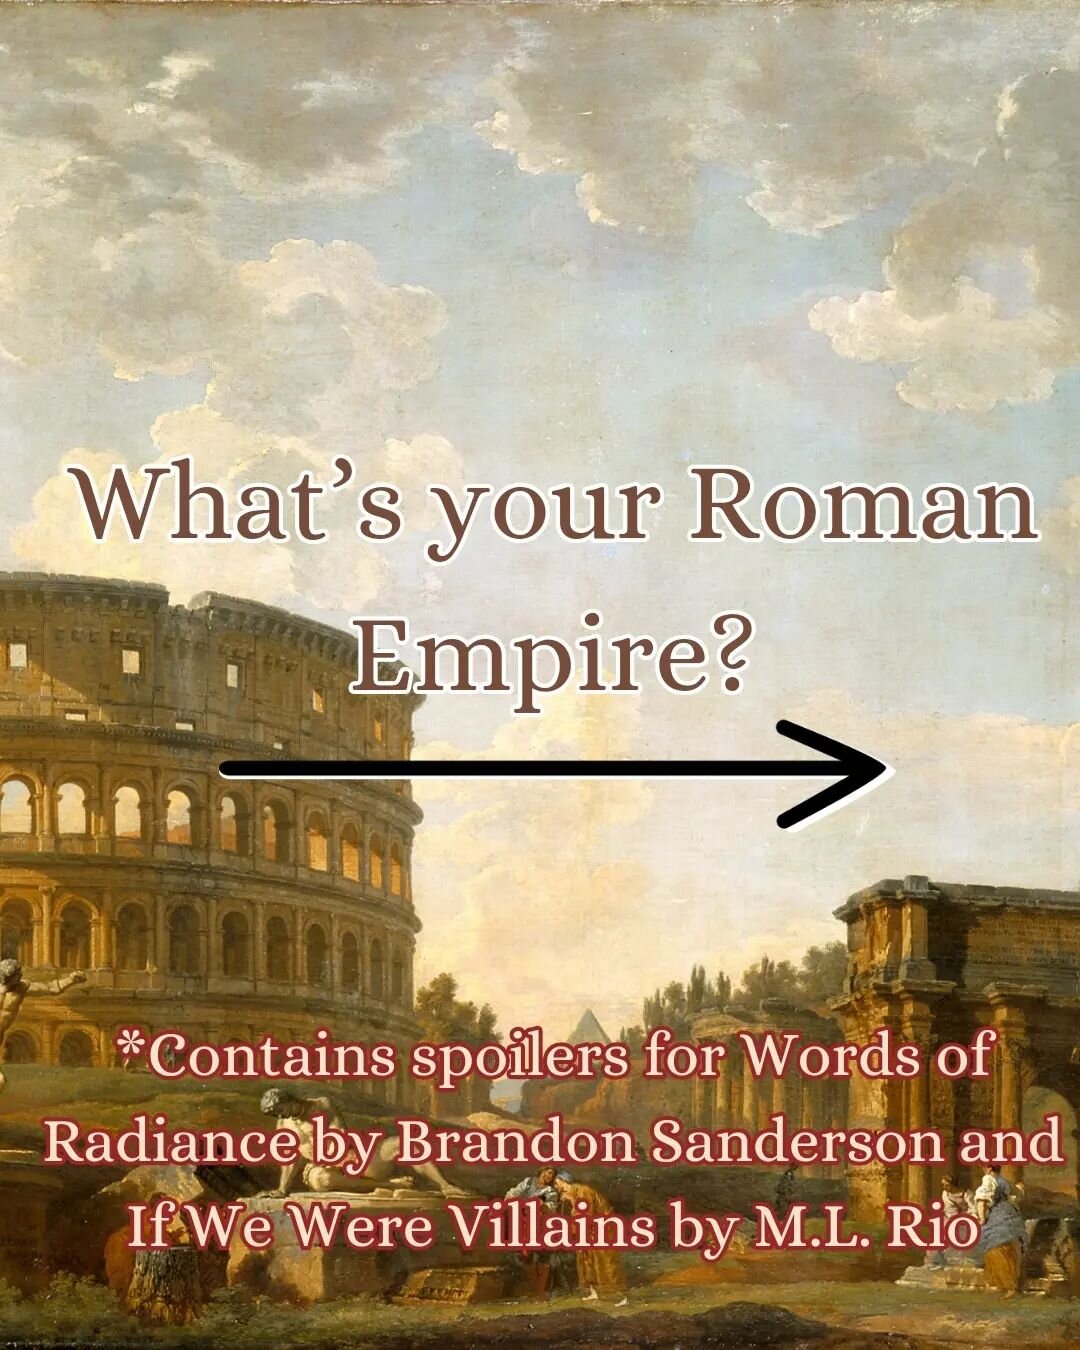 &quot;How often do you think about the Roman Empire&quot;
Me: *stares in Classical studies student*
Anyways, thought this was a fun trend to hop on with *my* Roman Empire moments. Also, did I miss the memo? Like, is there something the boys know abou